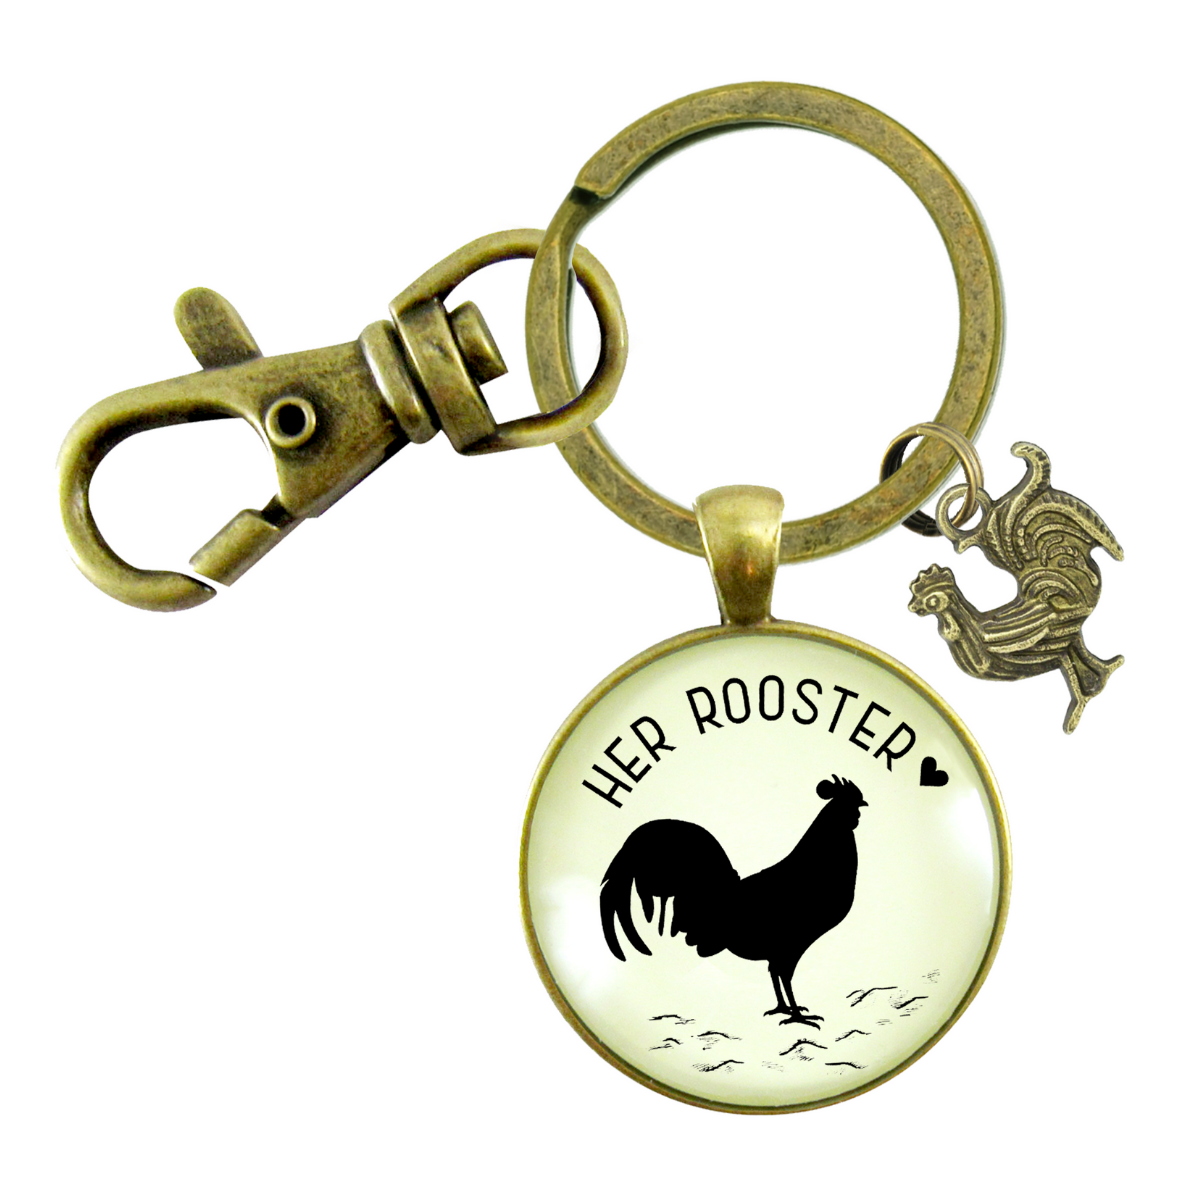 Her Rooster Mens Keychain For Chicken Family Vintage Inspired Jewlery - Gutsy Goodness Handmade Jewelry;Her Rooster Mens Keychain For Chicken Family Vintage Inspired Jewlery